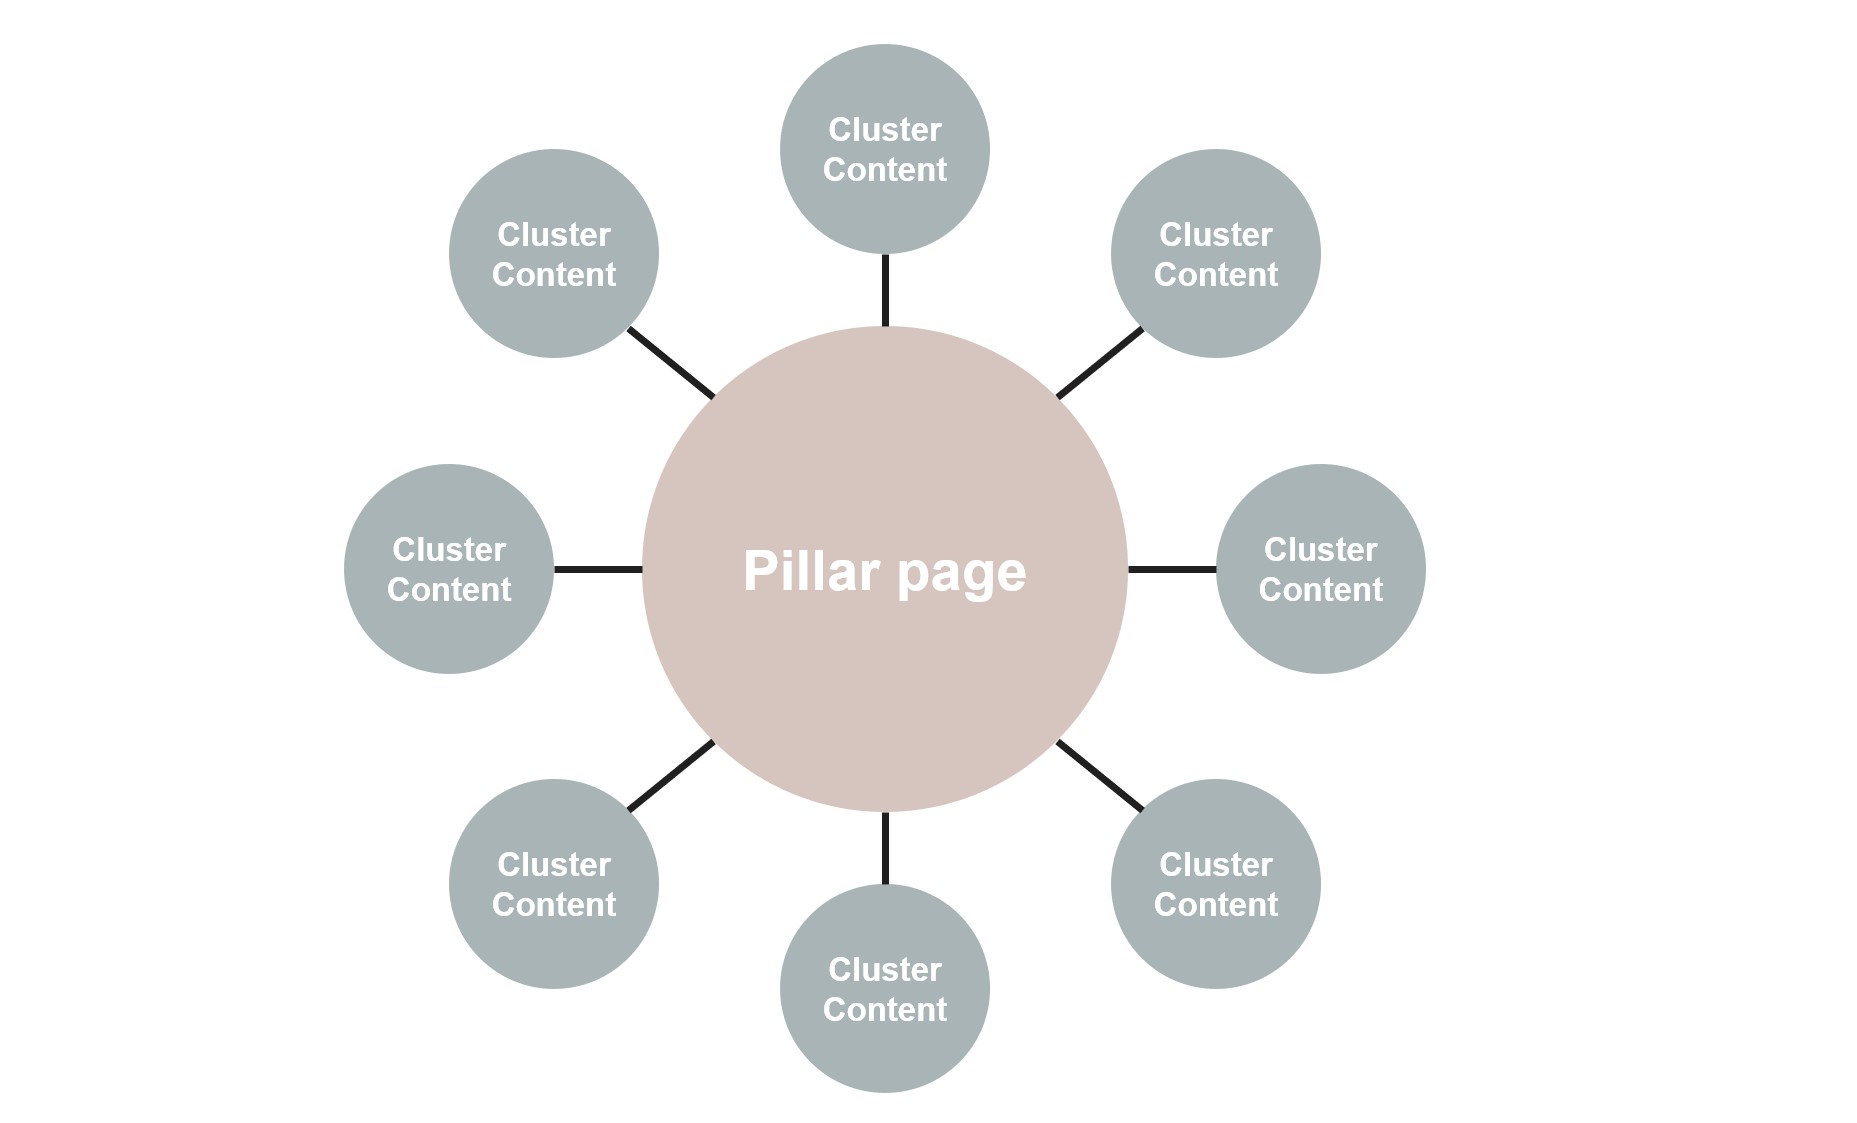 zooma-cluster-content-diagram